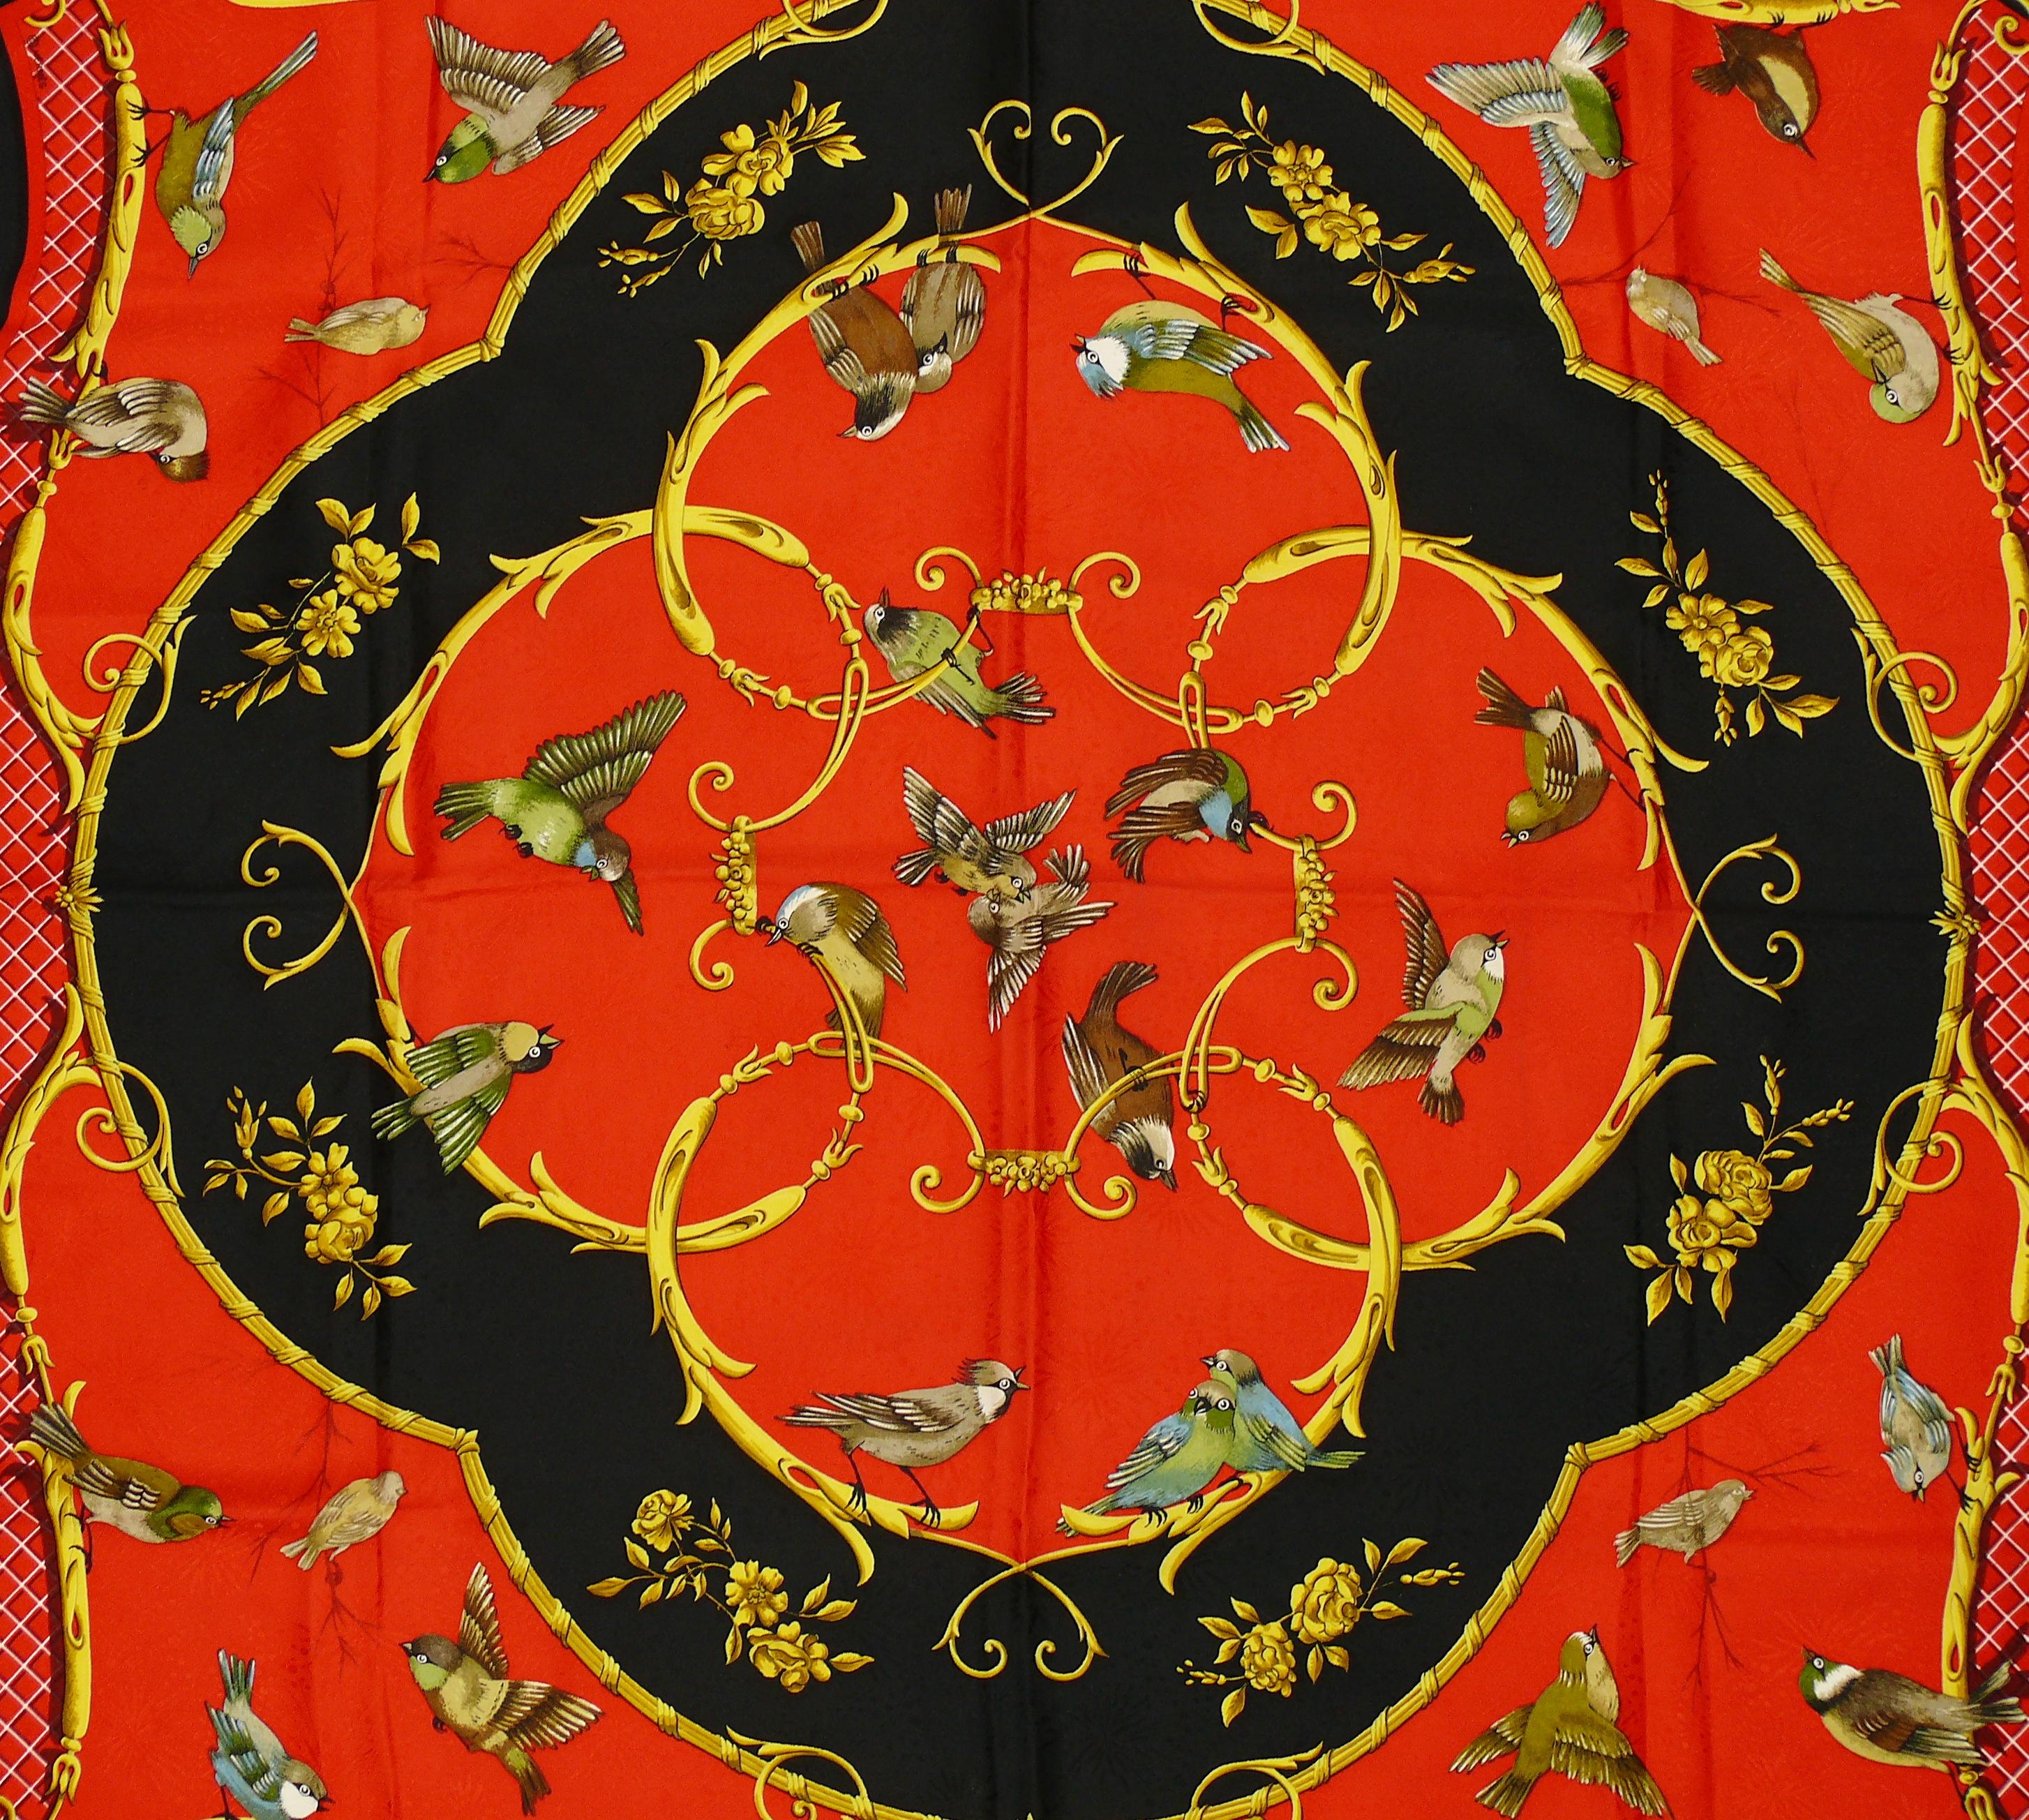 HERMES vintage rare jacquard silk carré scarf LA CLE DES CHAMPS featuring birds adorned with gold colored Baroque ornaments on a red and black background.

Designed by FRANCOISE FACONNET.

This scarf features :
- Hand rolled borders.
- Plump hems.
-